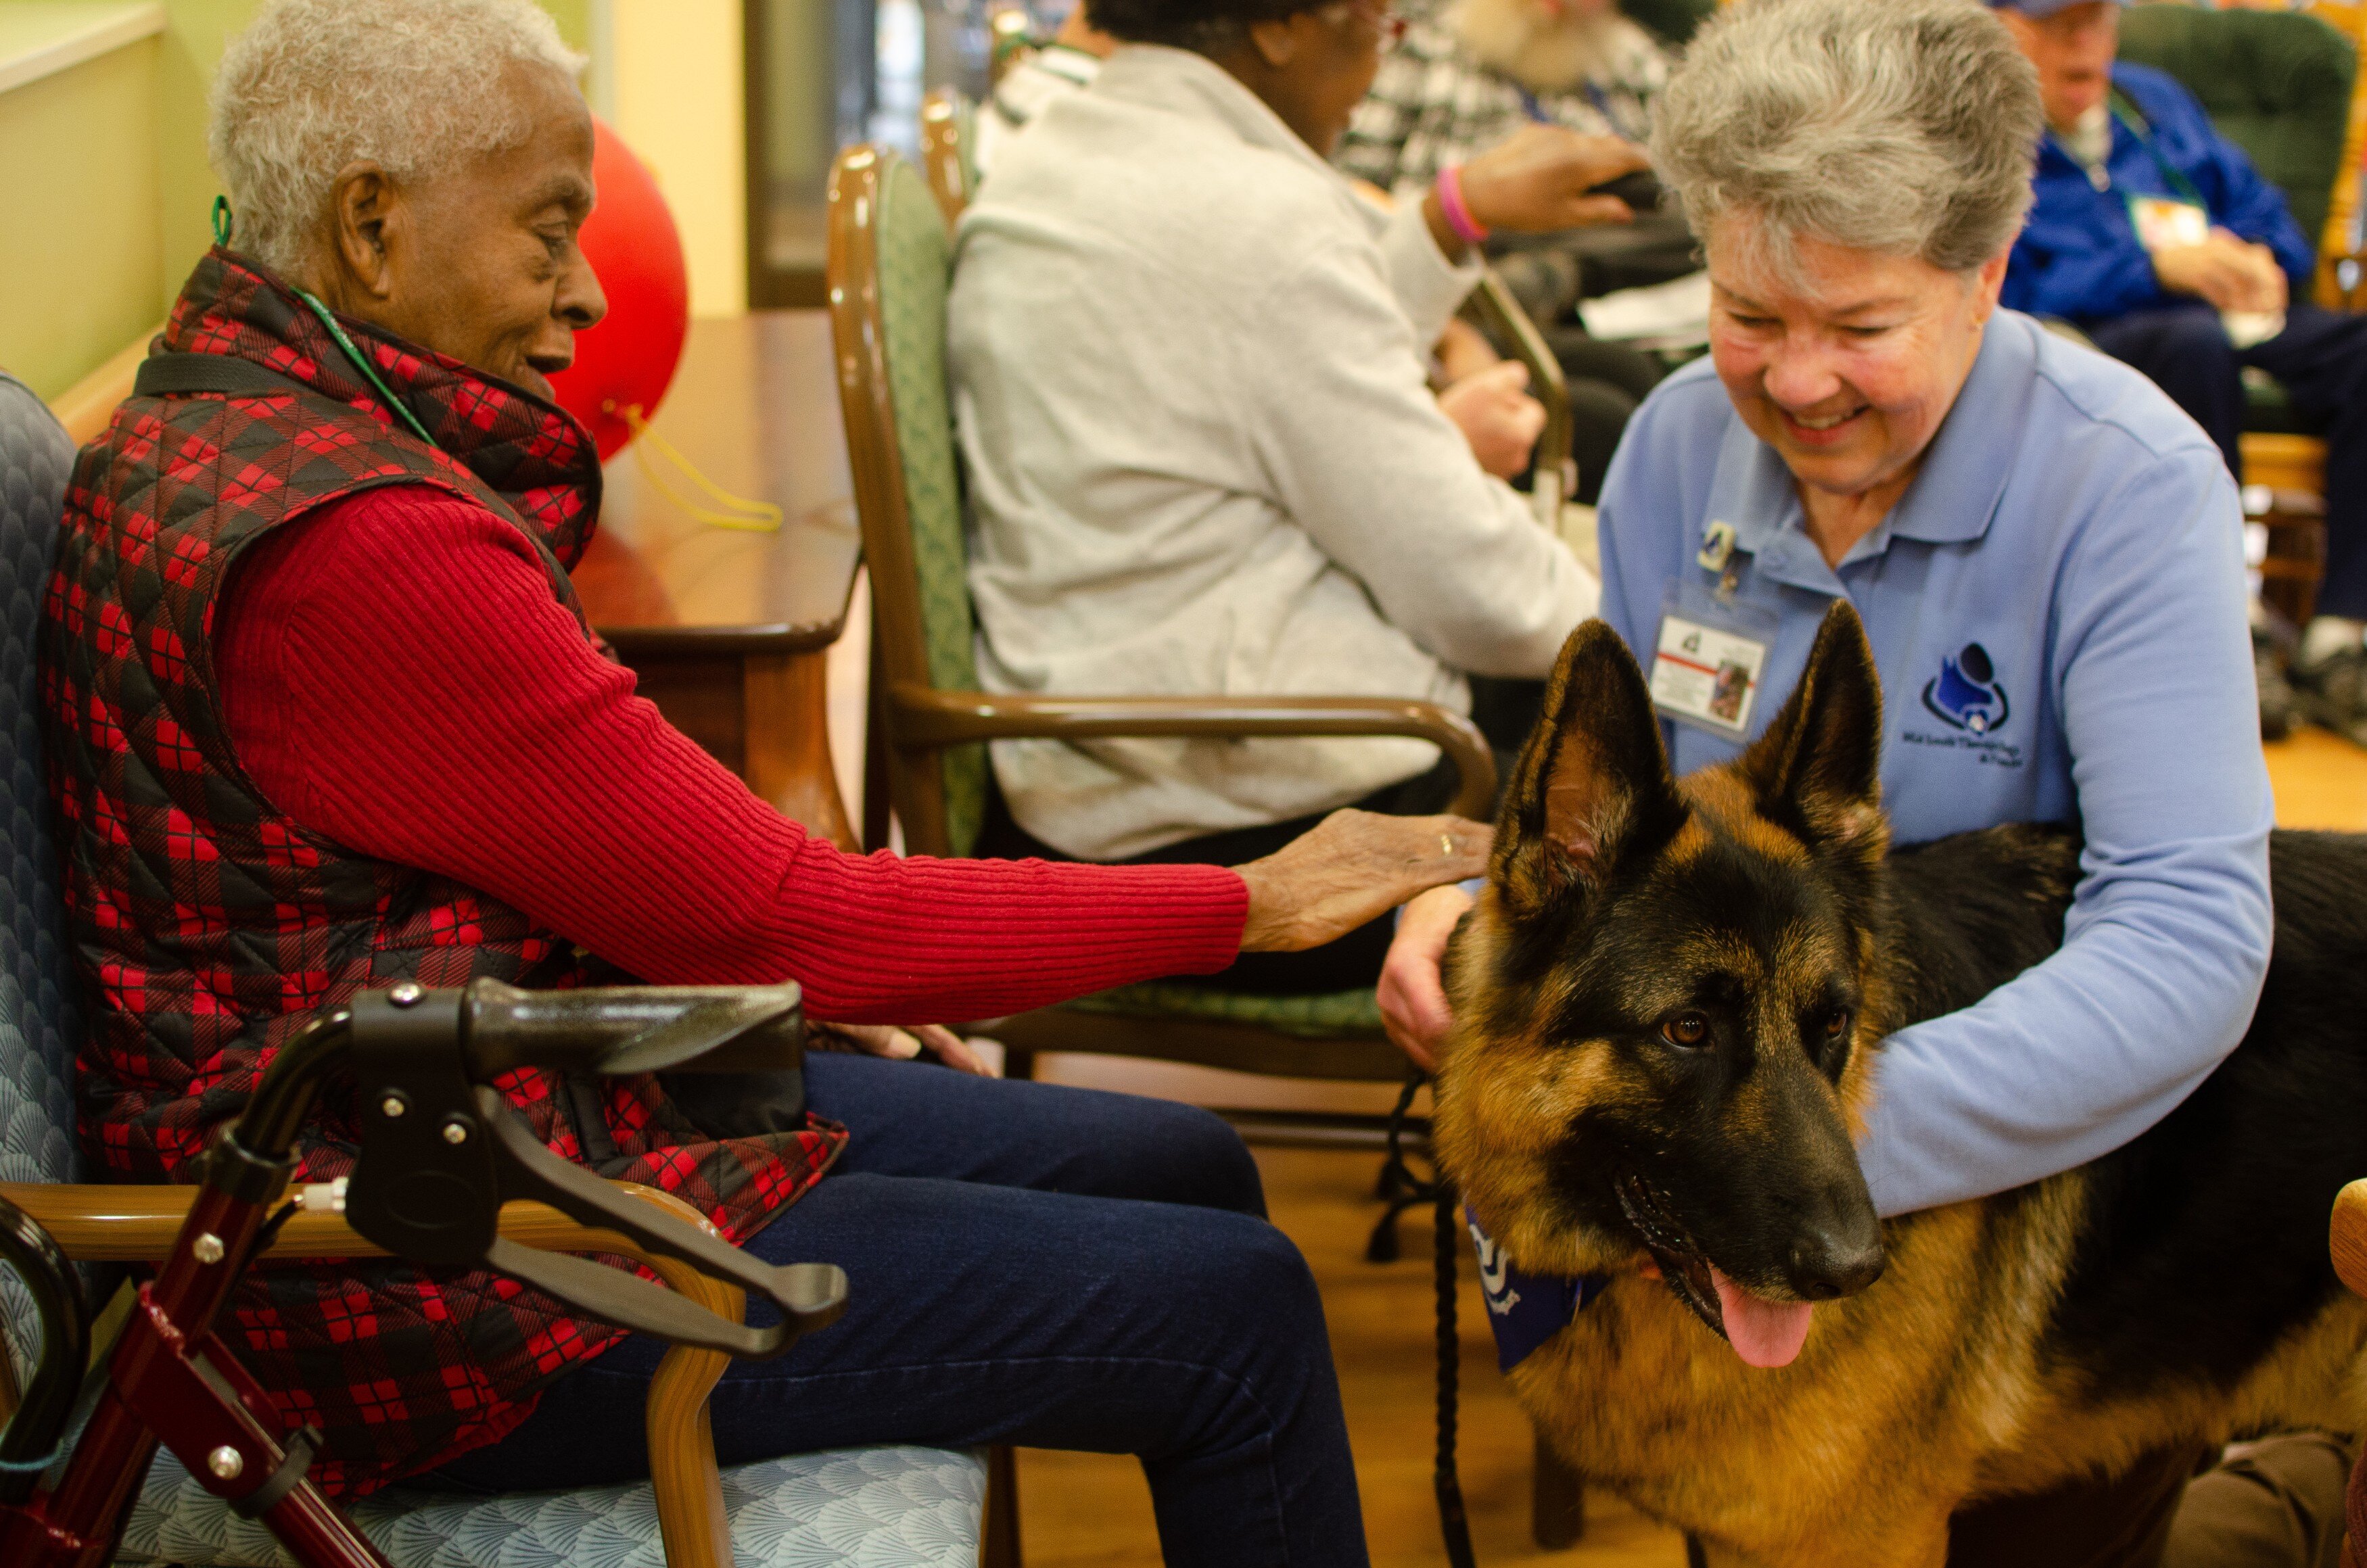 Batman the therapy dog helps Dorothy's Place clients suffering from Alzheimer's and dementia. Here client Lula pets Batman and talks with his handler, San Chambers. (Cat Evans)